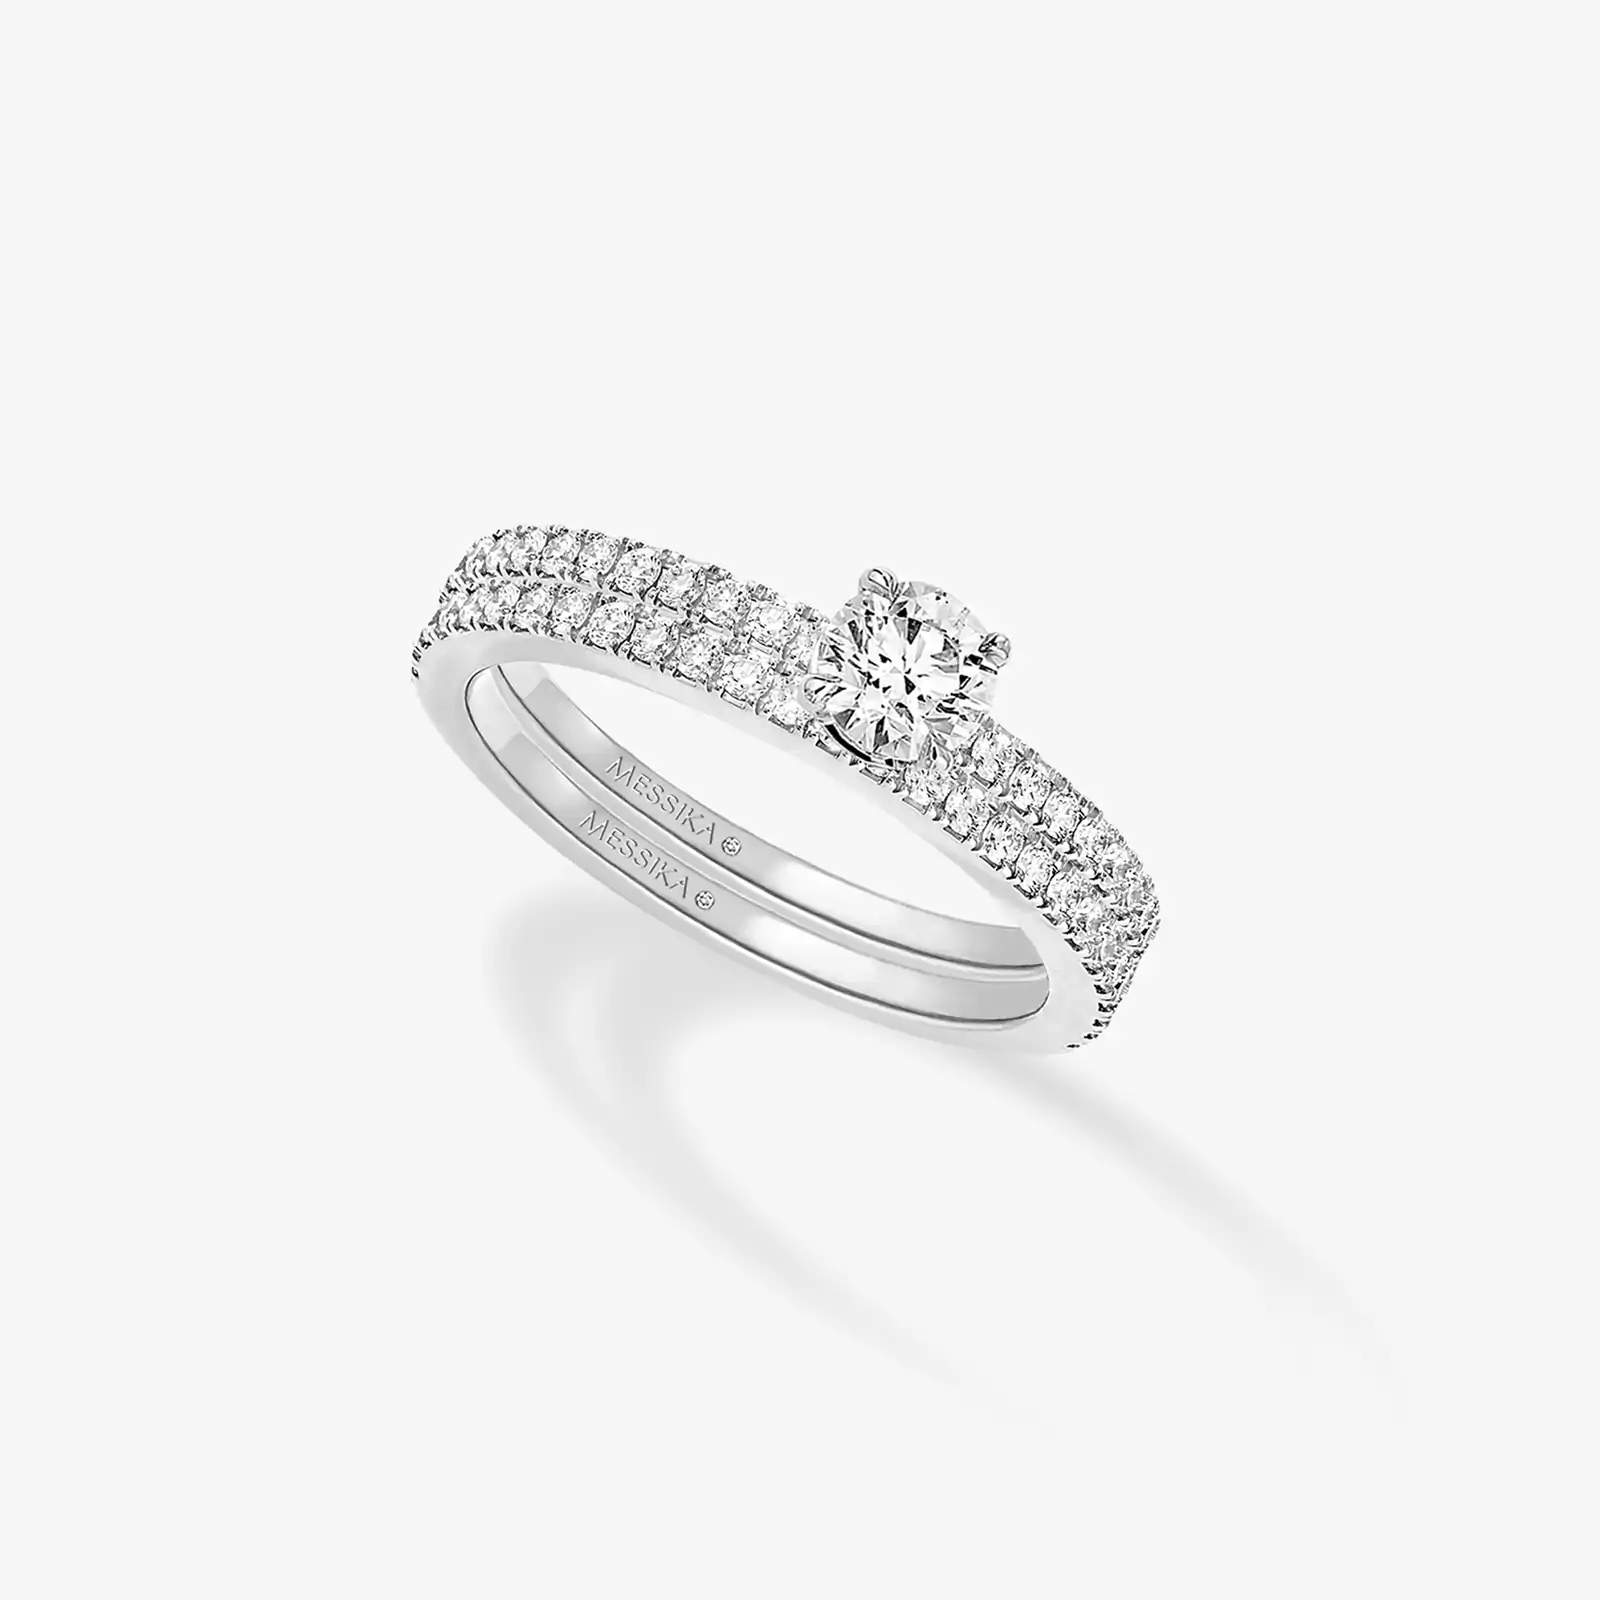 Wedding Band Solitaire Duo White Gold For Her Diamond Ring 08288-WG